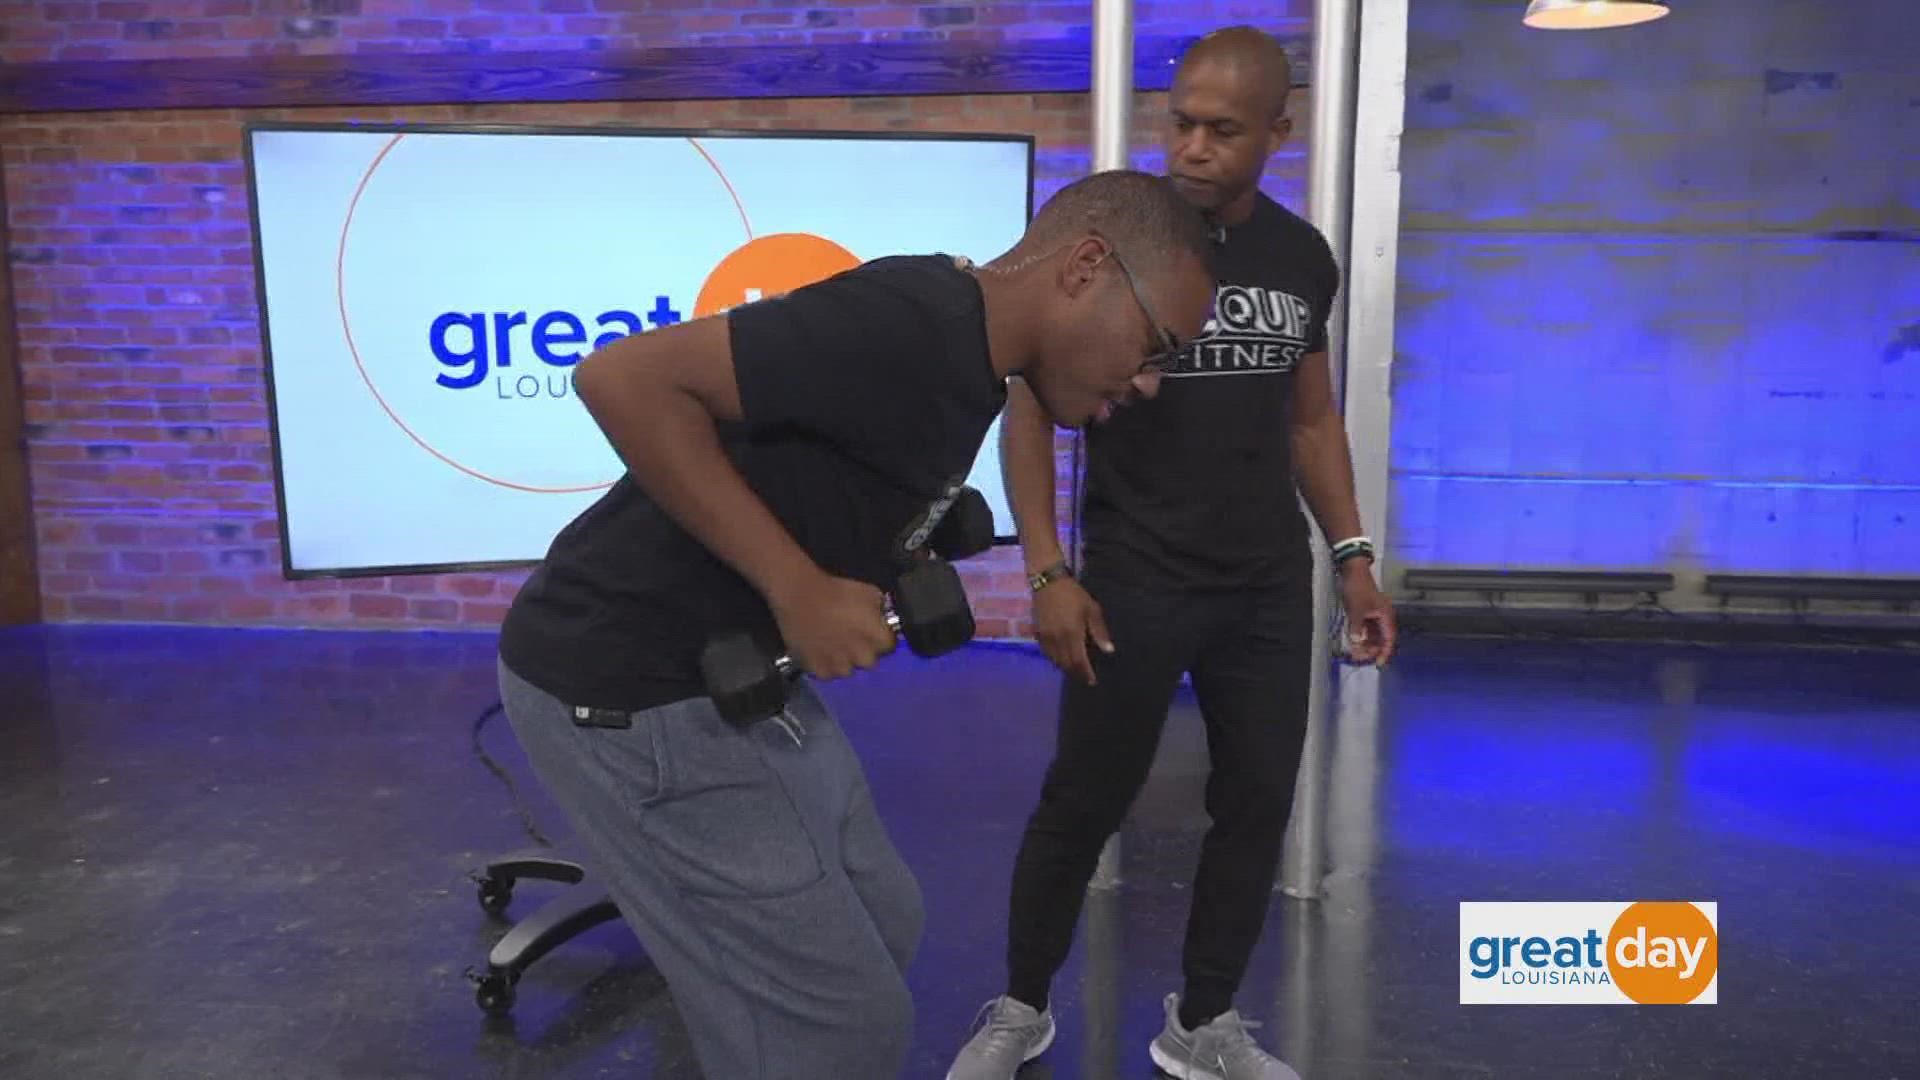 Equip Fitness shows us some fun workouts to help you focus on your upper body and increase both strength and flexibility.